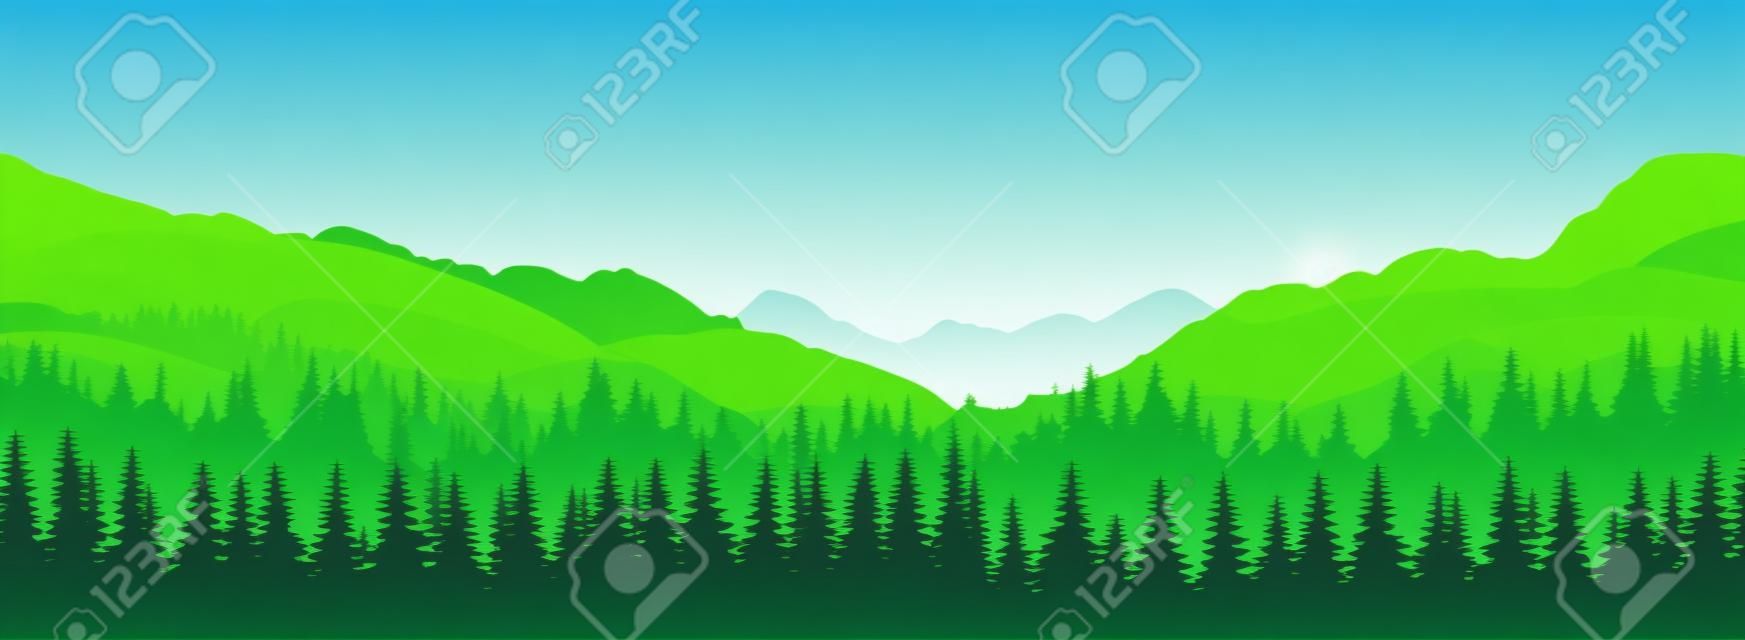 Vector panoramic landscape with green silhouettes of trees and hills